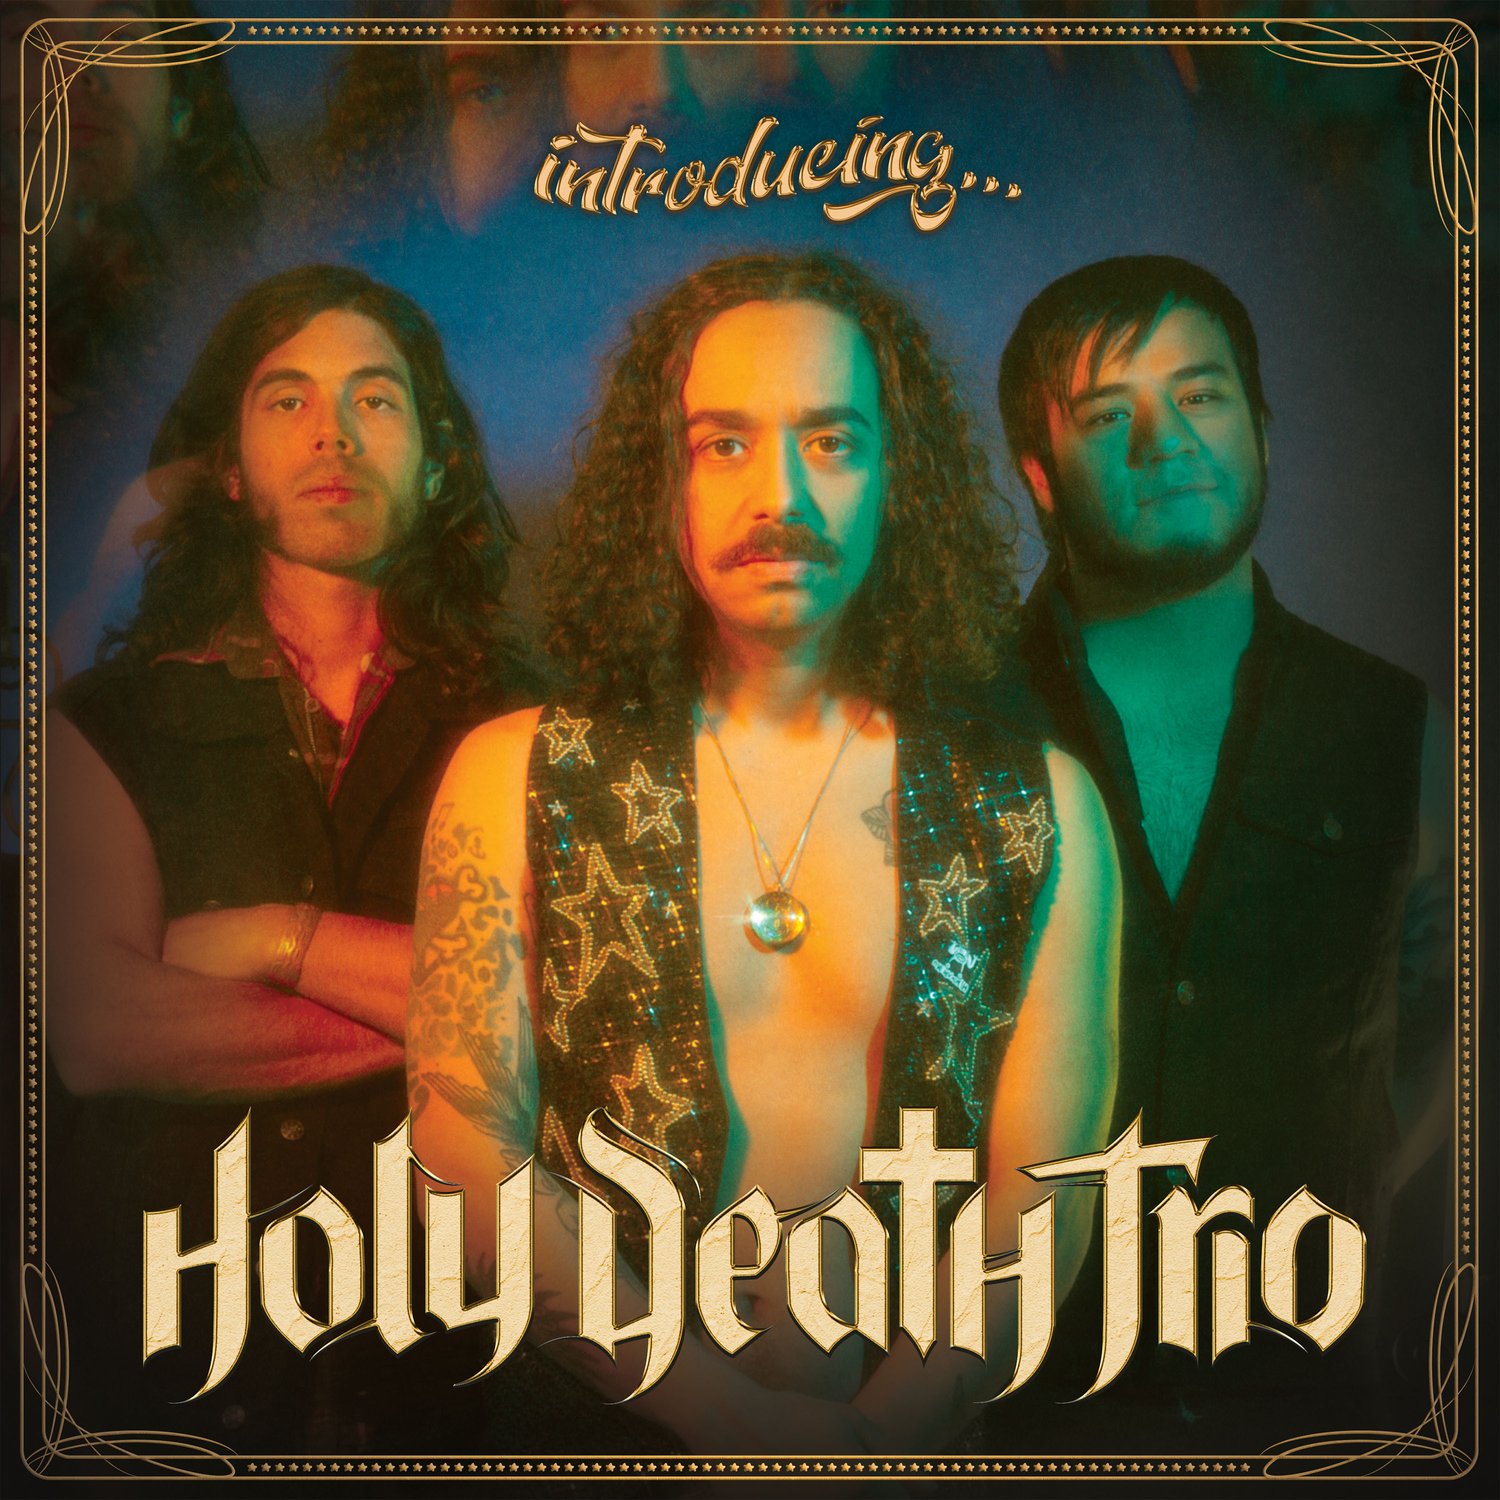 Image of Holy Death Trio - Introducing... Deluxe Vinyl Editions